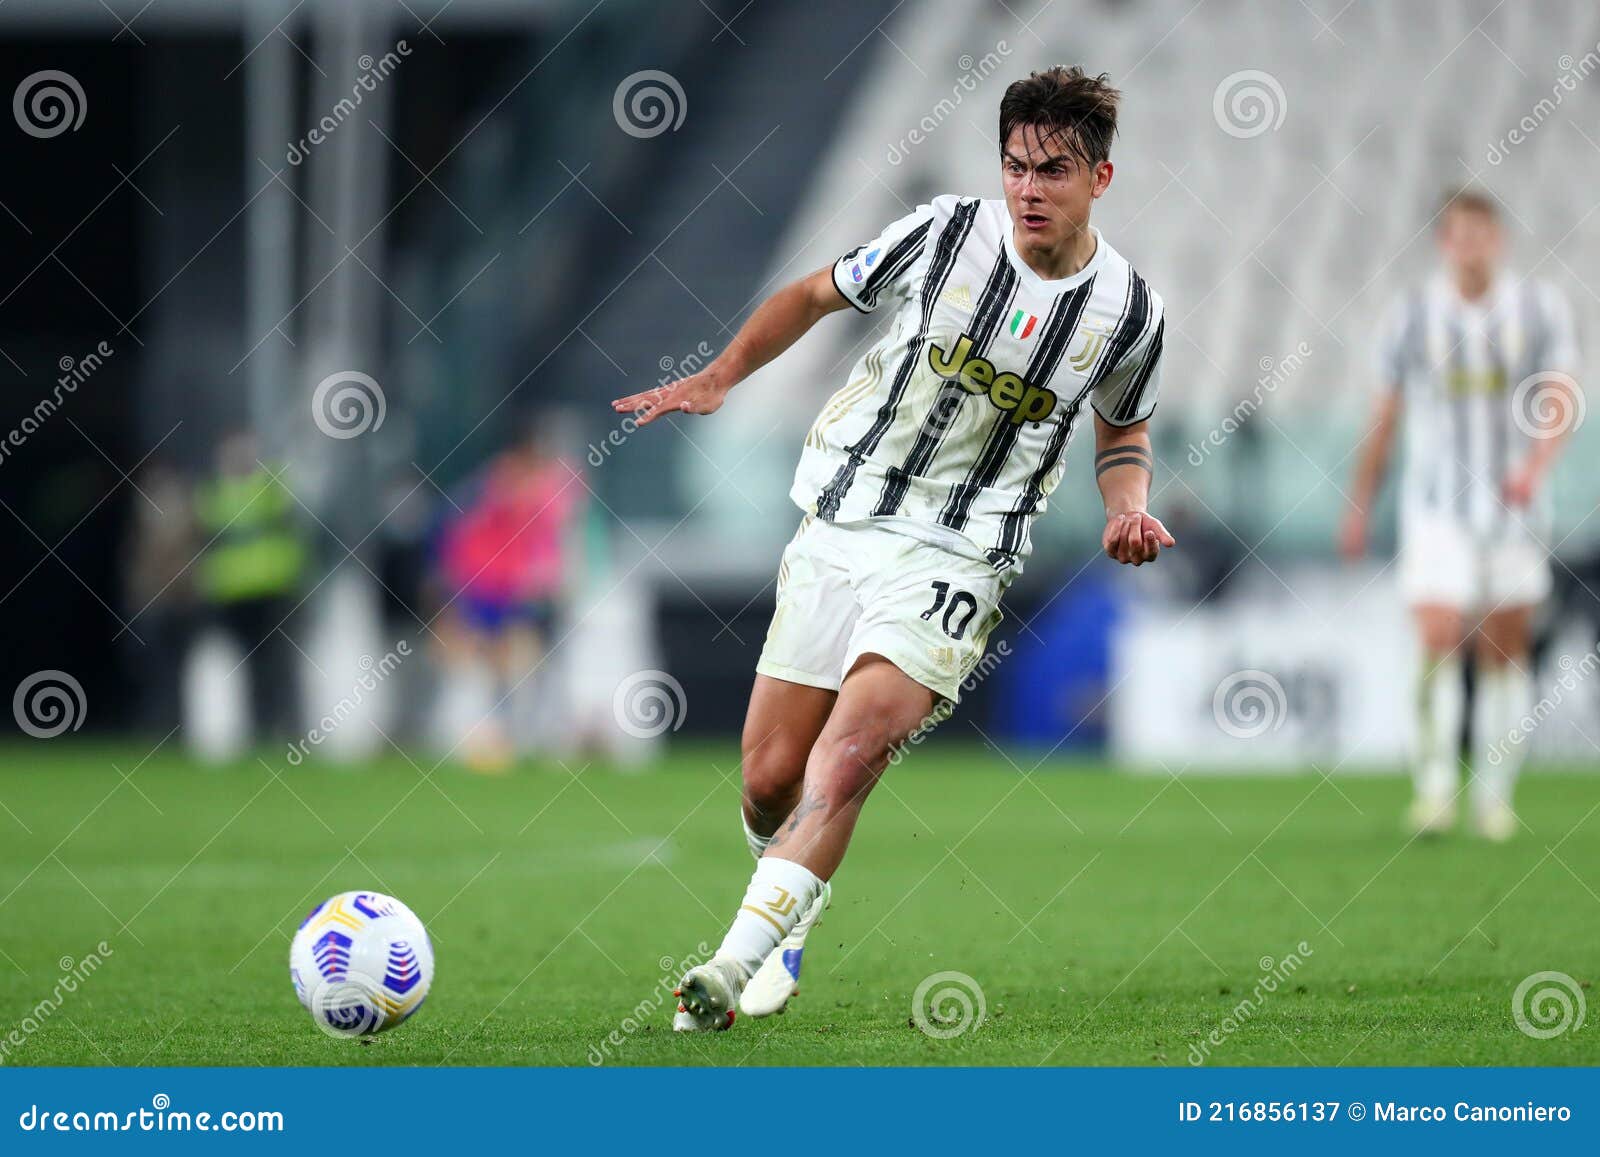 Serie b official ball hi-res stock photography and images - Alamy